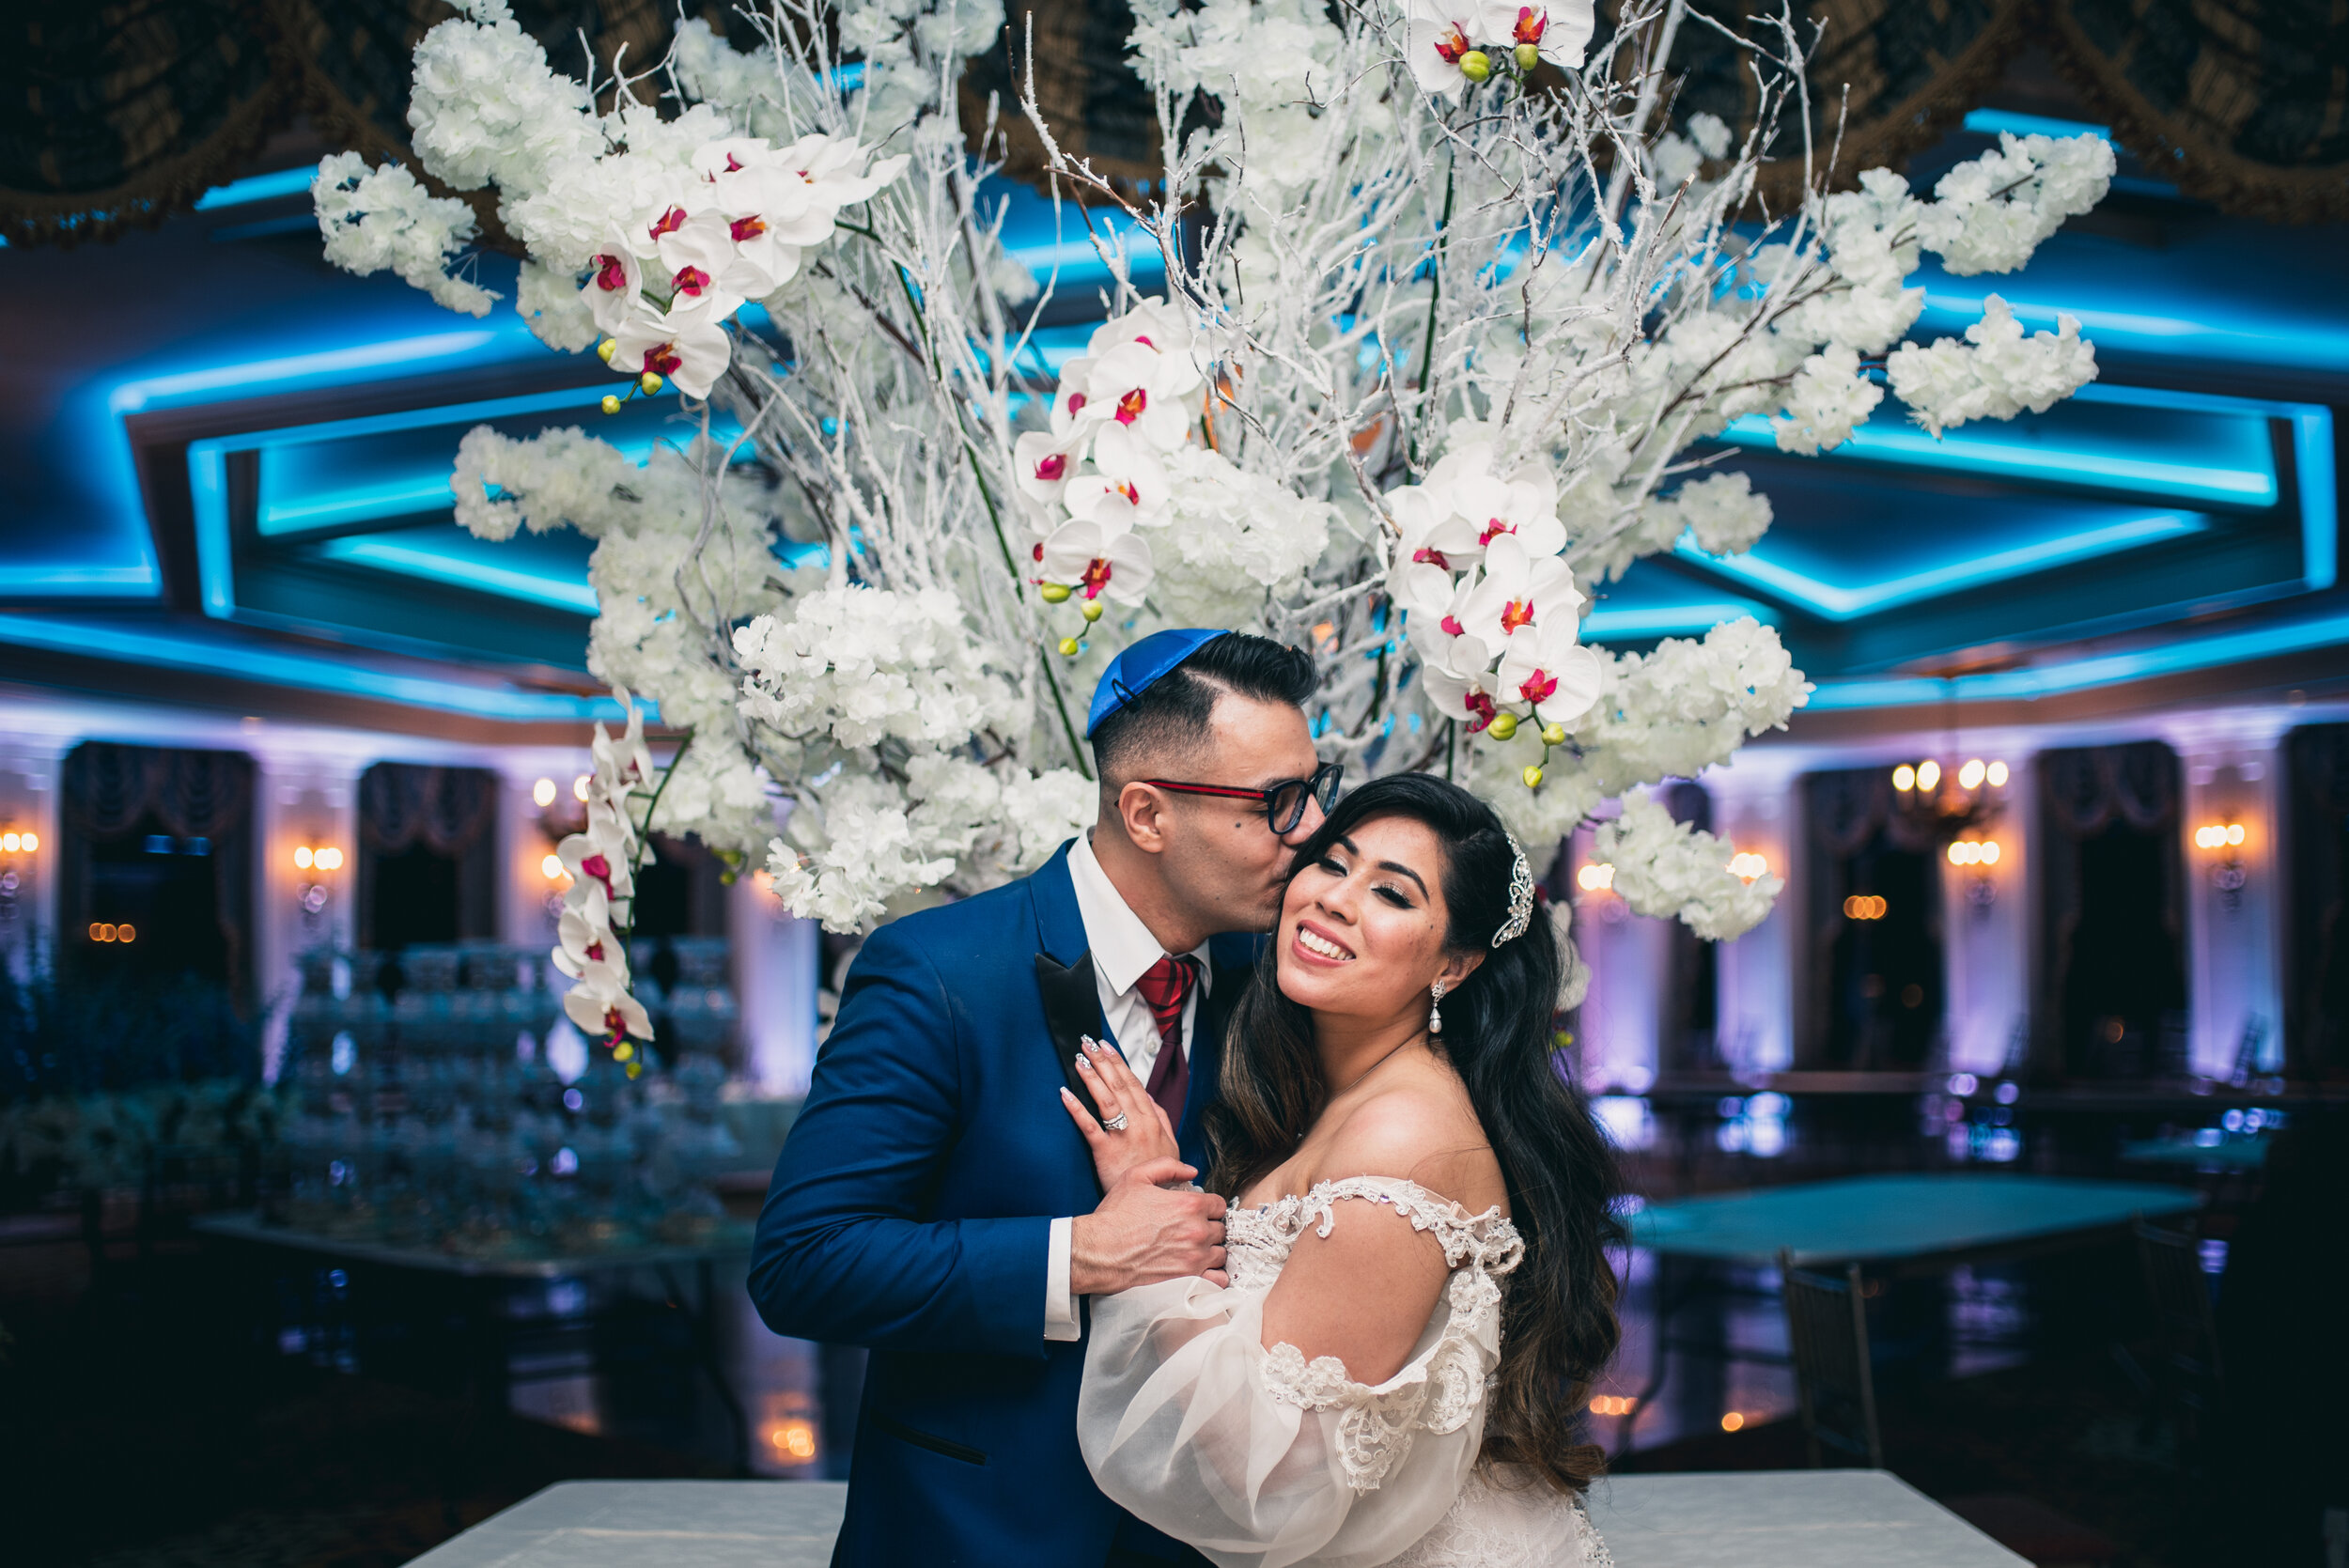 Tiffany + Yuriy — Portrait of a Young Couple